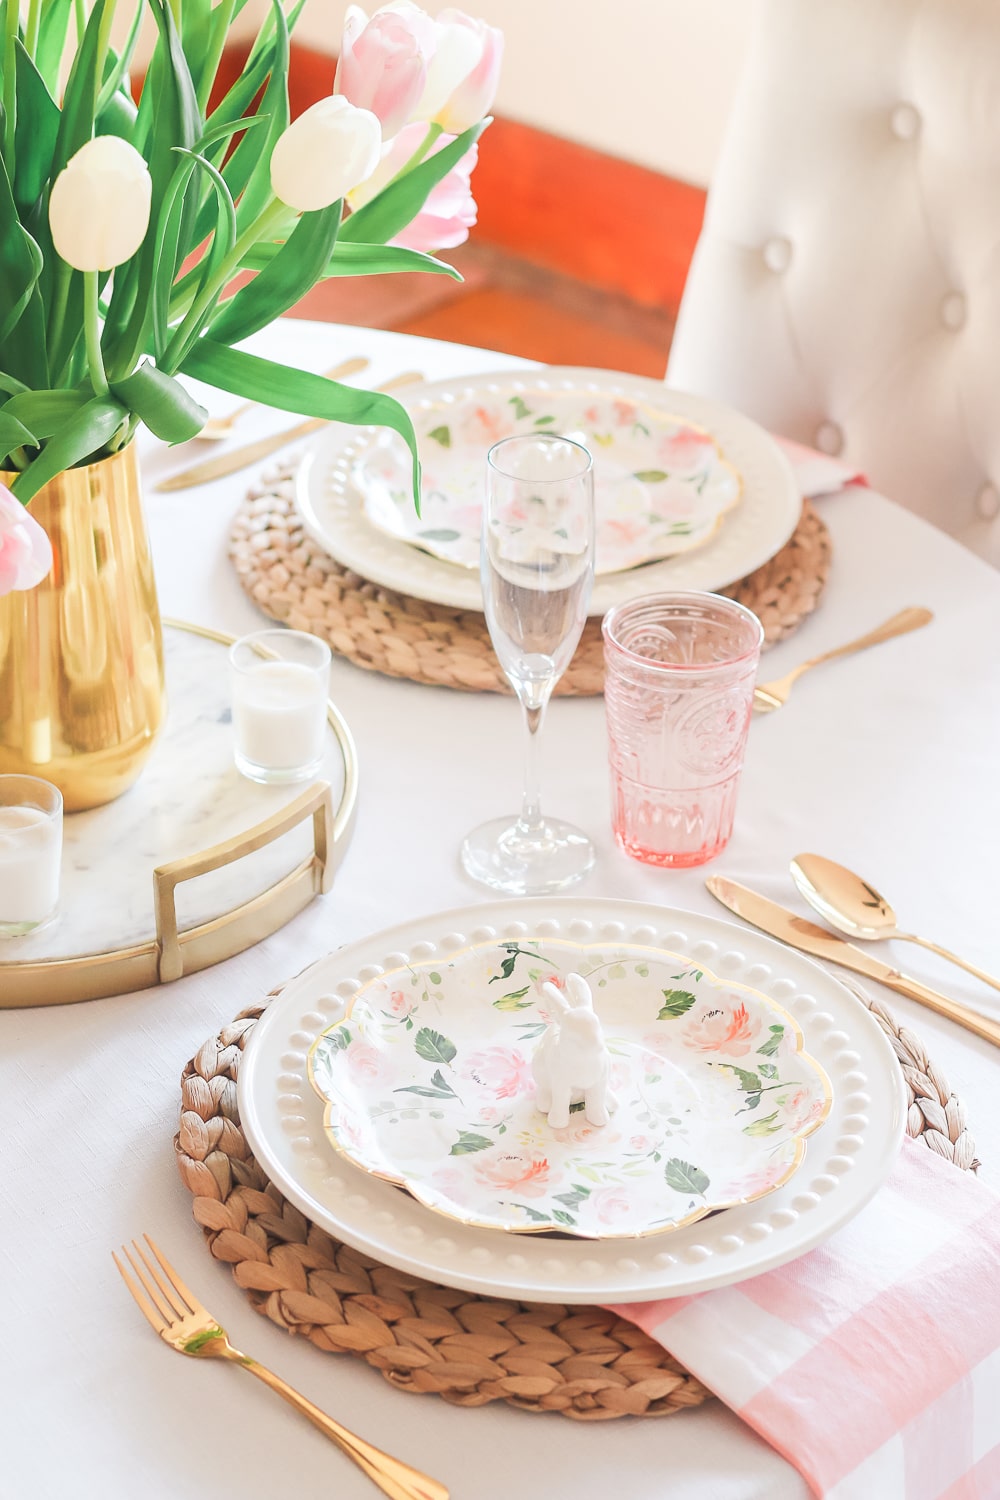 Simple Easter tablescape by southern lifestyle blogger Stephanie Ziajka on Diary of a Debutante